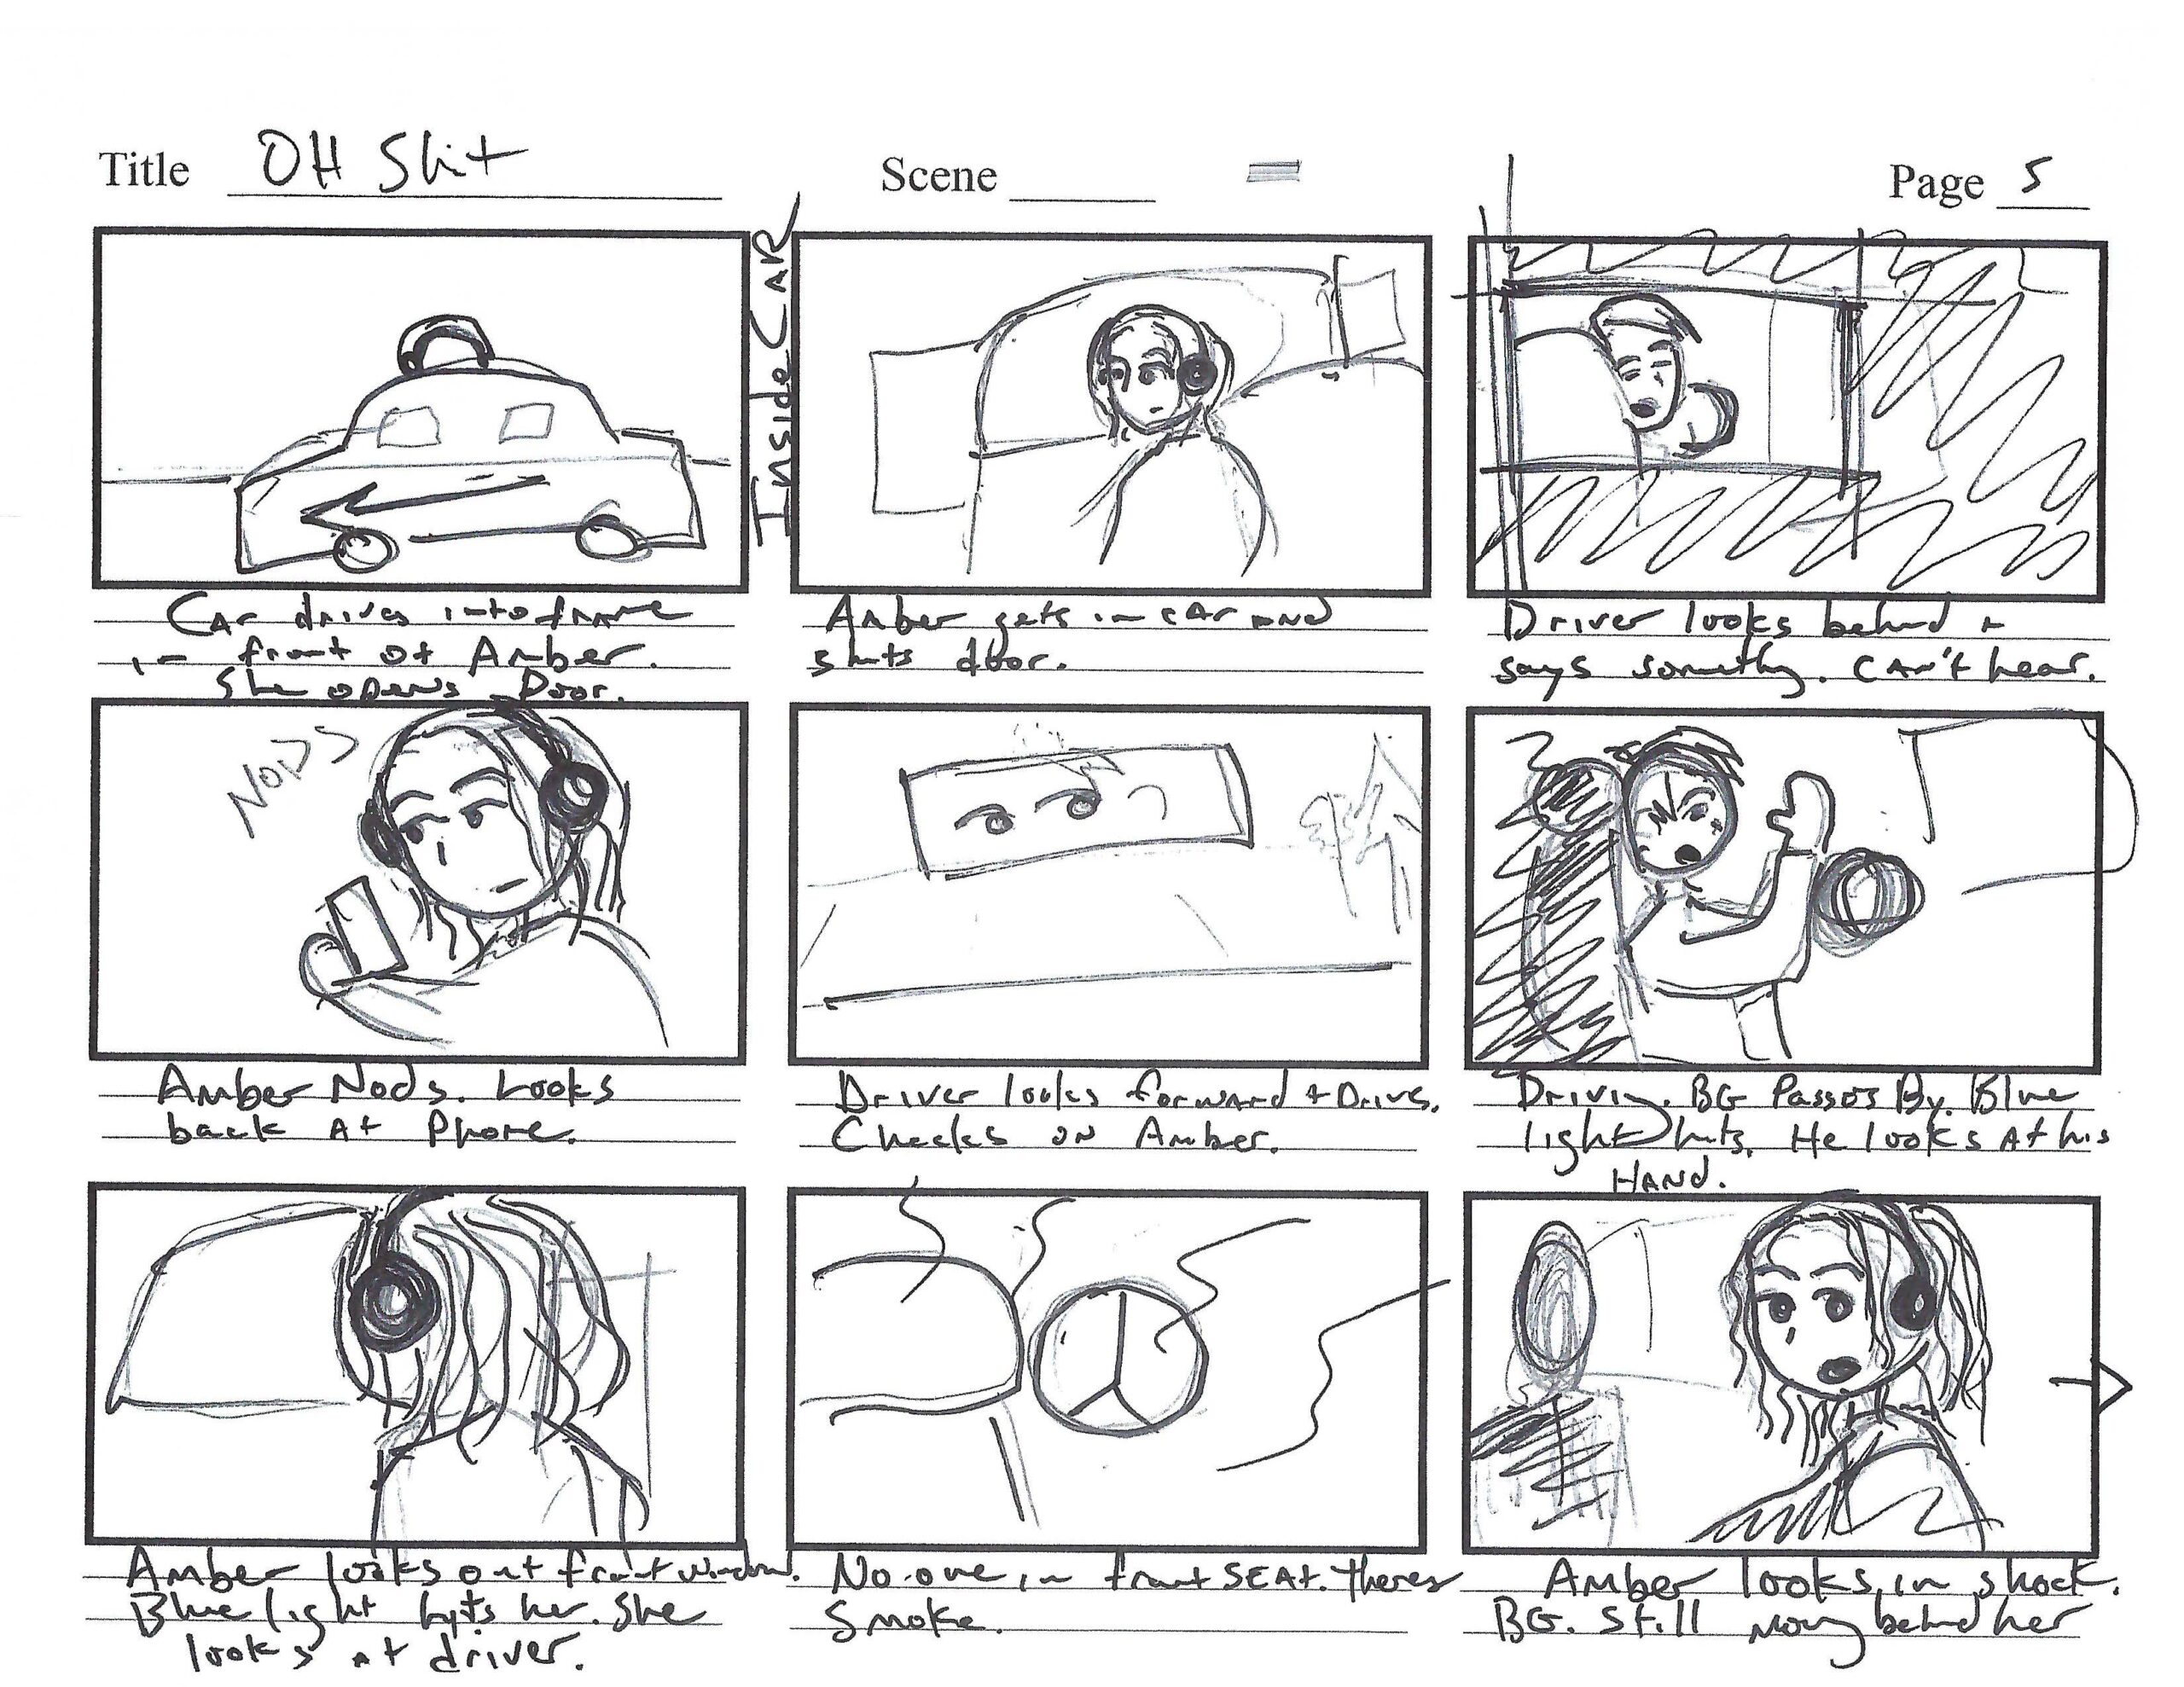 OhShitStoryboards_Page_5